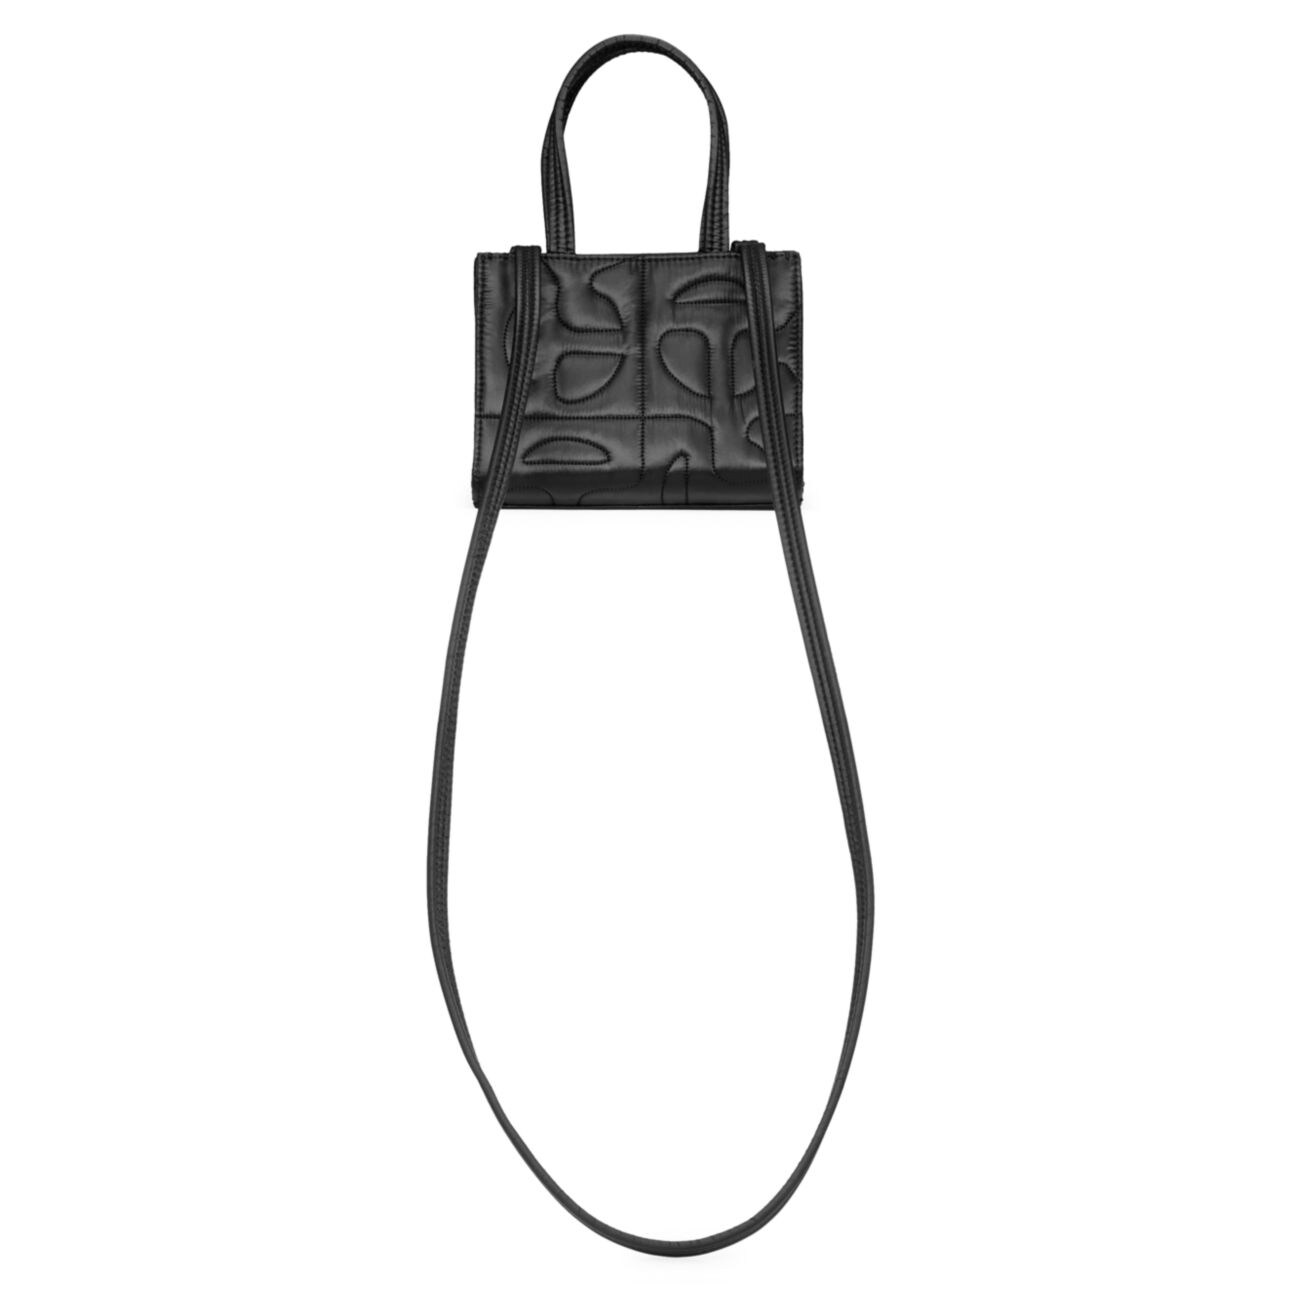 Сумка-шопер Moose Knuckles x Telfar Small Quilted Shopper Moose Knuckles